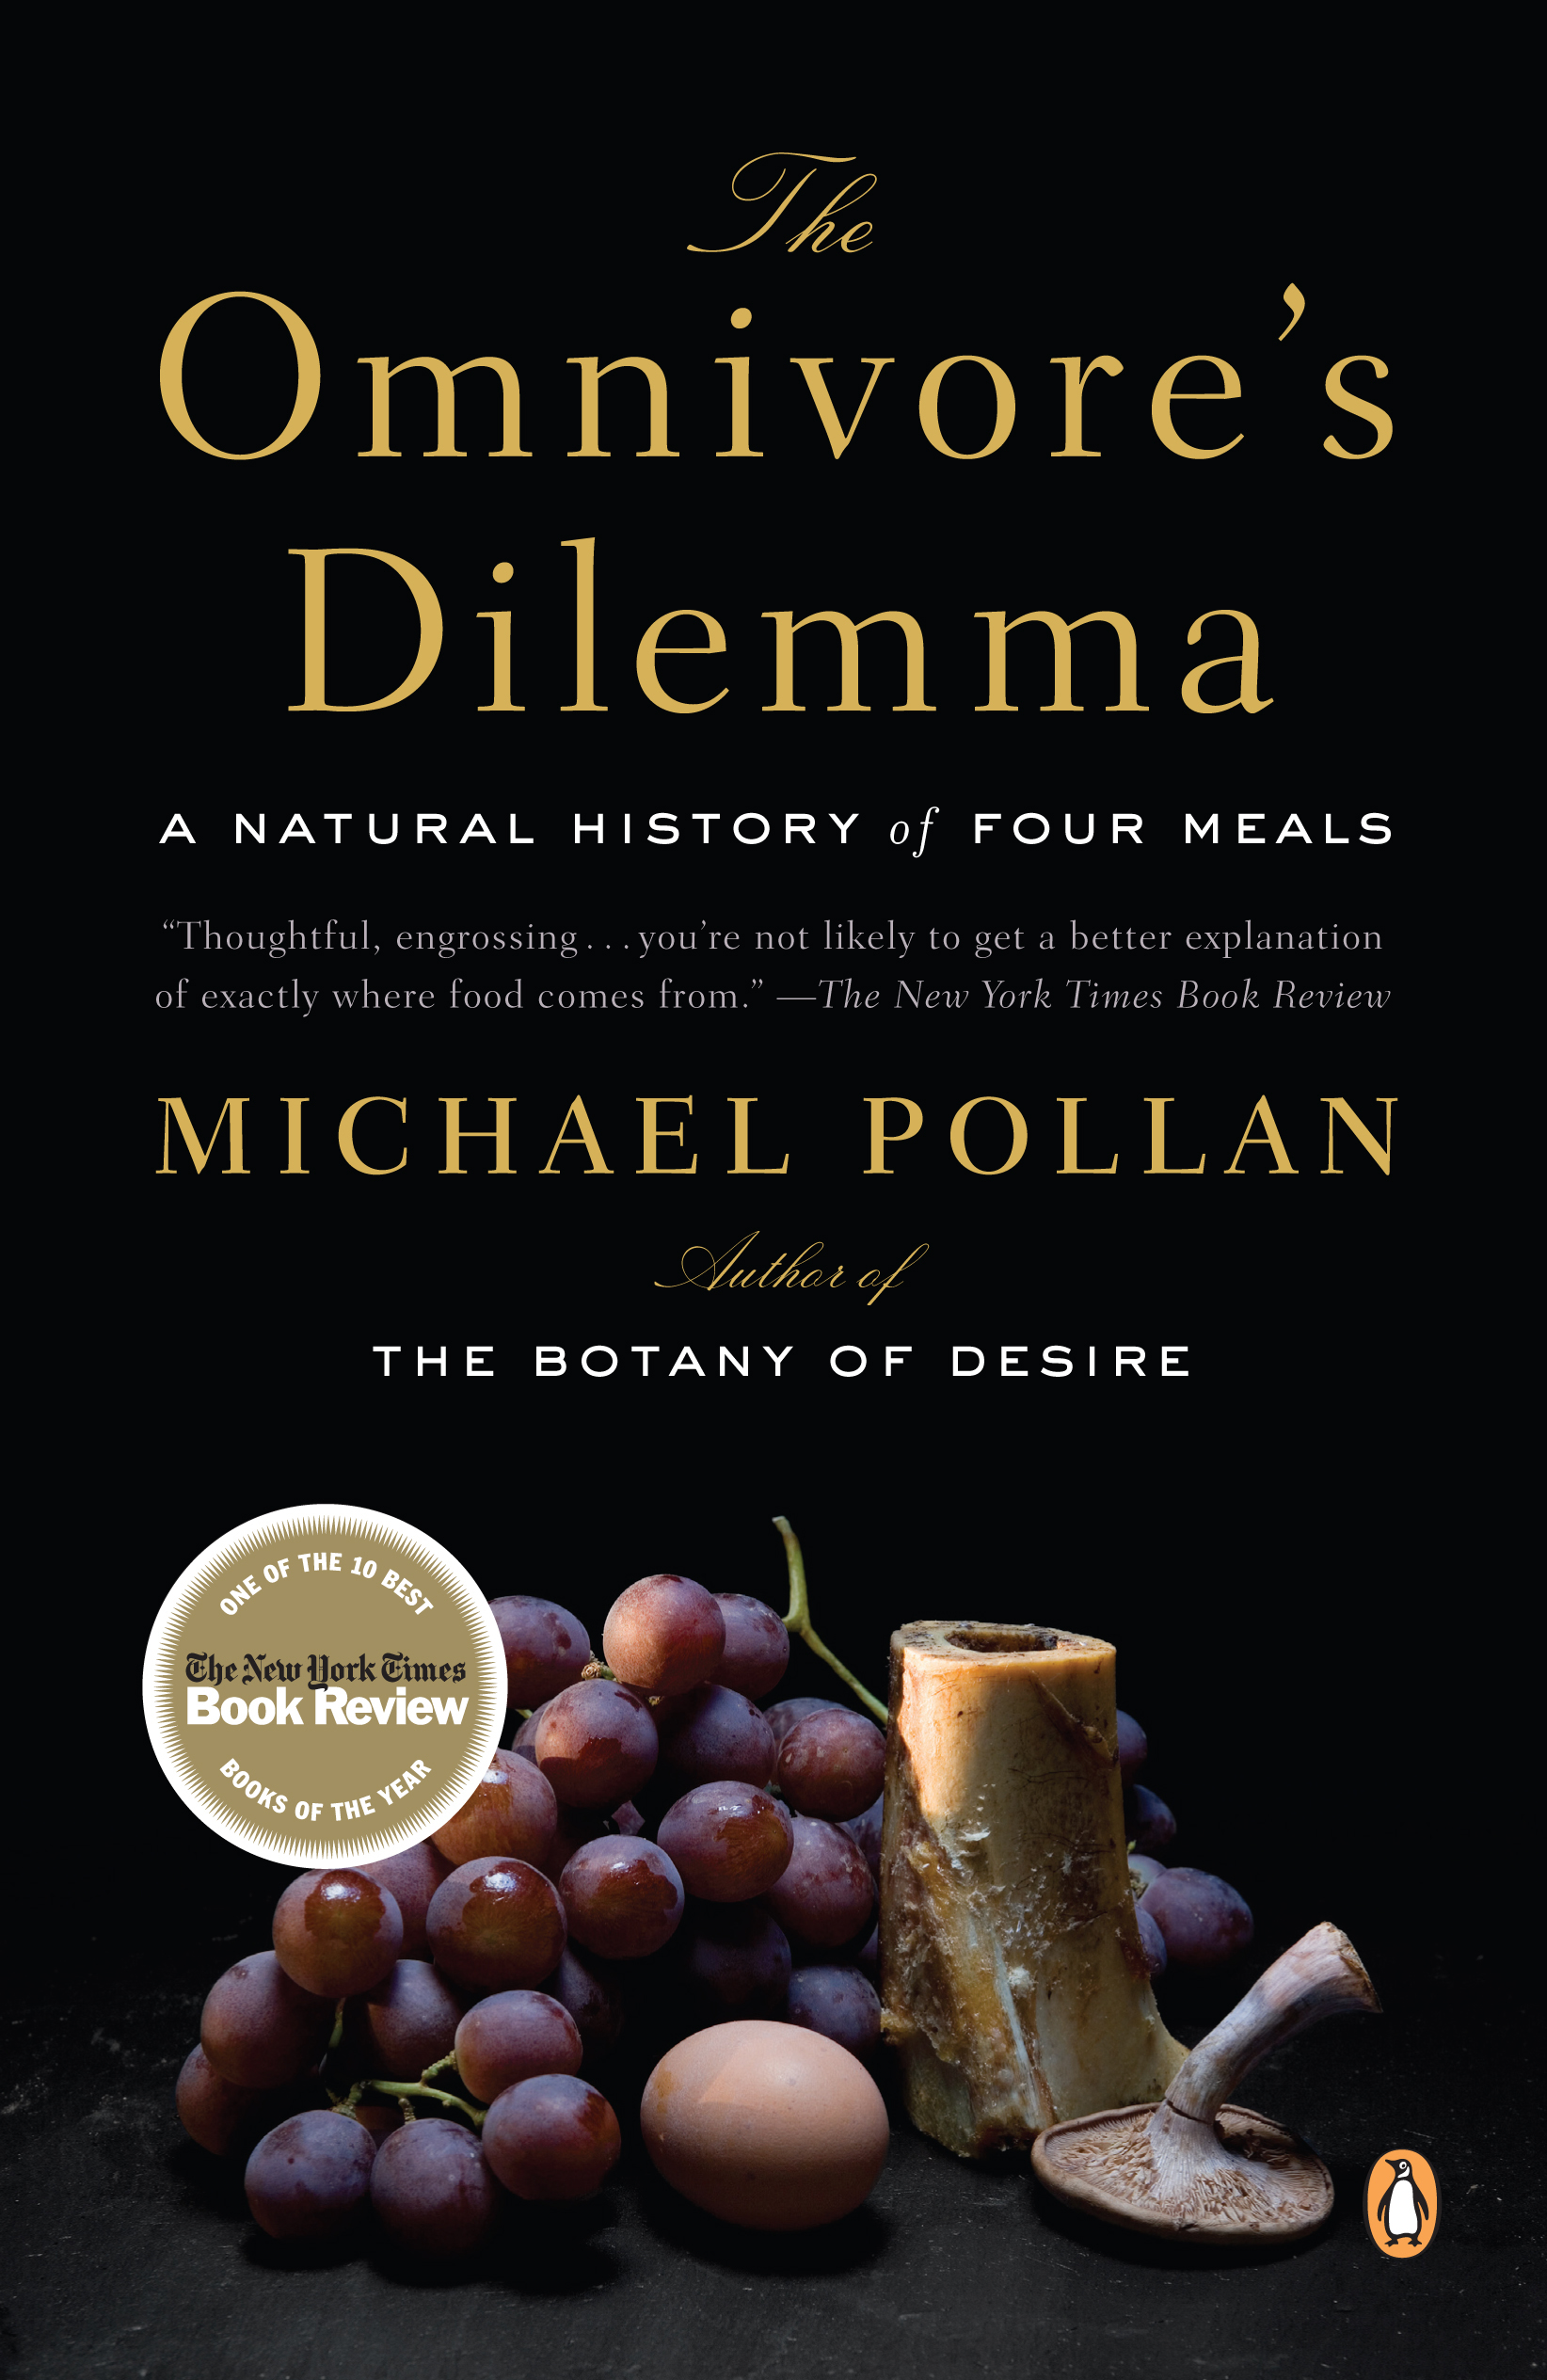 The Omnivore’s Dilemma: A Natural History of Four Meals by Michael Pollan